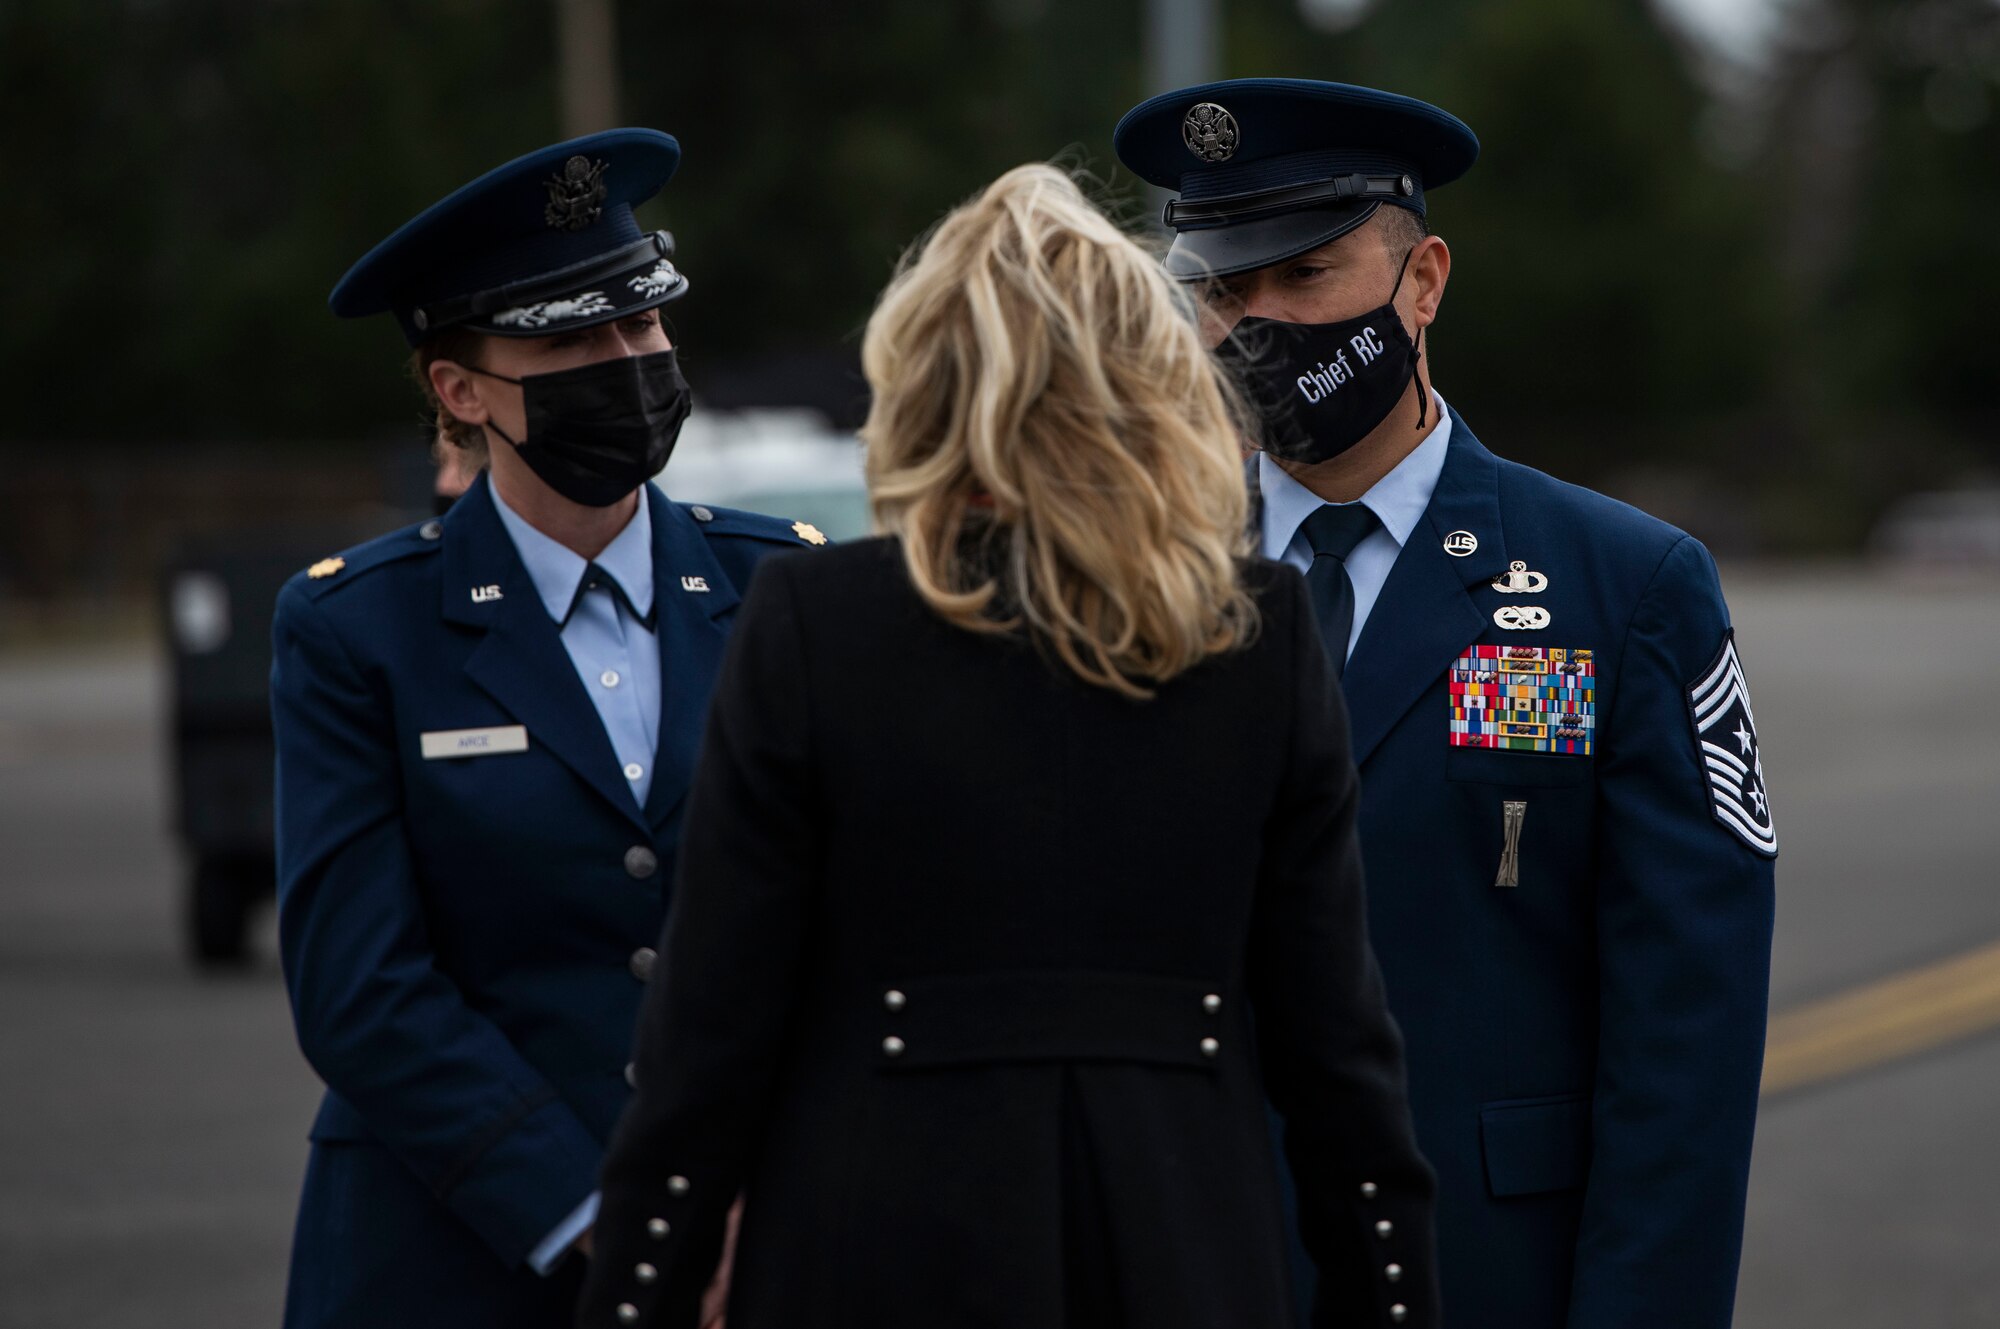 First Lady Dr. Jill Biden is greeted by U.S. Air Force Chief Master Sgt. Joe Arce, command chief with the 62nd Airlift Wing, and his spouse, U.S. Air Force Maj. Jennifer Arce, a flight medicine nurse with the 62nd Medical Squadron, at Joint Base Lewis-McChord, Washington, March 8, 2021. Biden visited with military families as part of an on-going effort to relaunch Joining Forces, an initiative to support service members, veterans and their families through wellness, education, and employment opportunities. (U.S. Air Force photo by Staff Sgt. Rachel Williams)